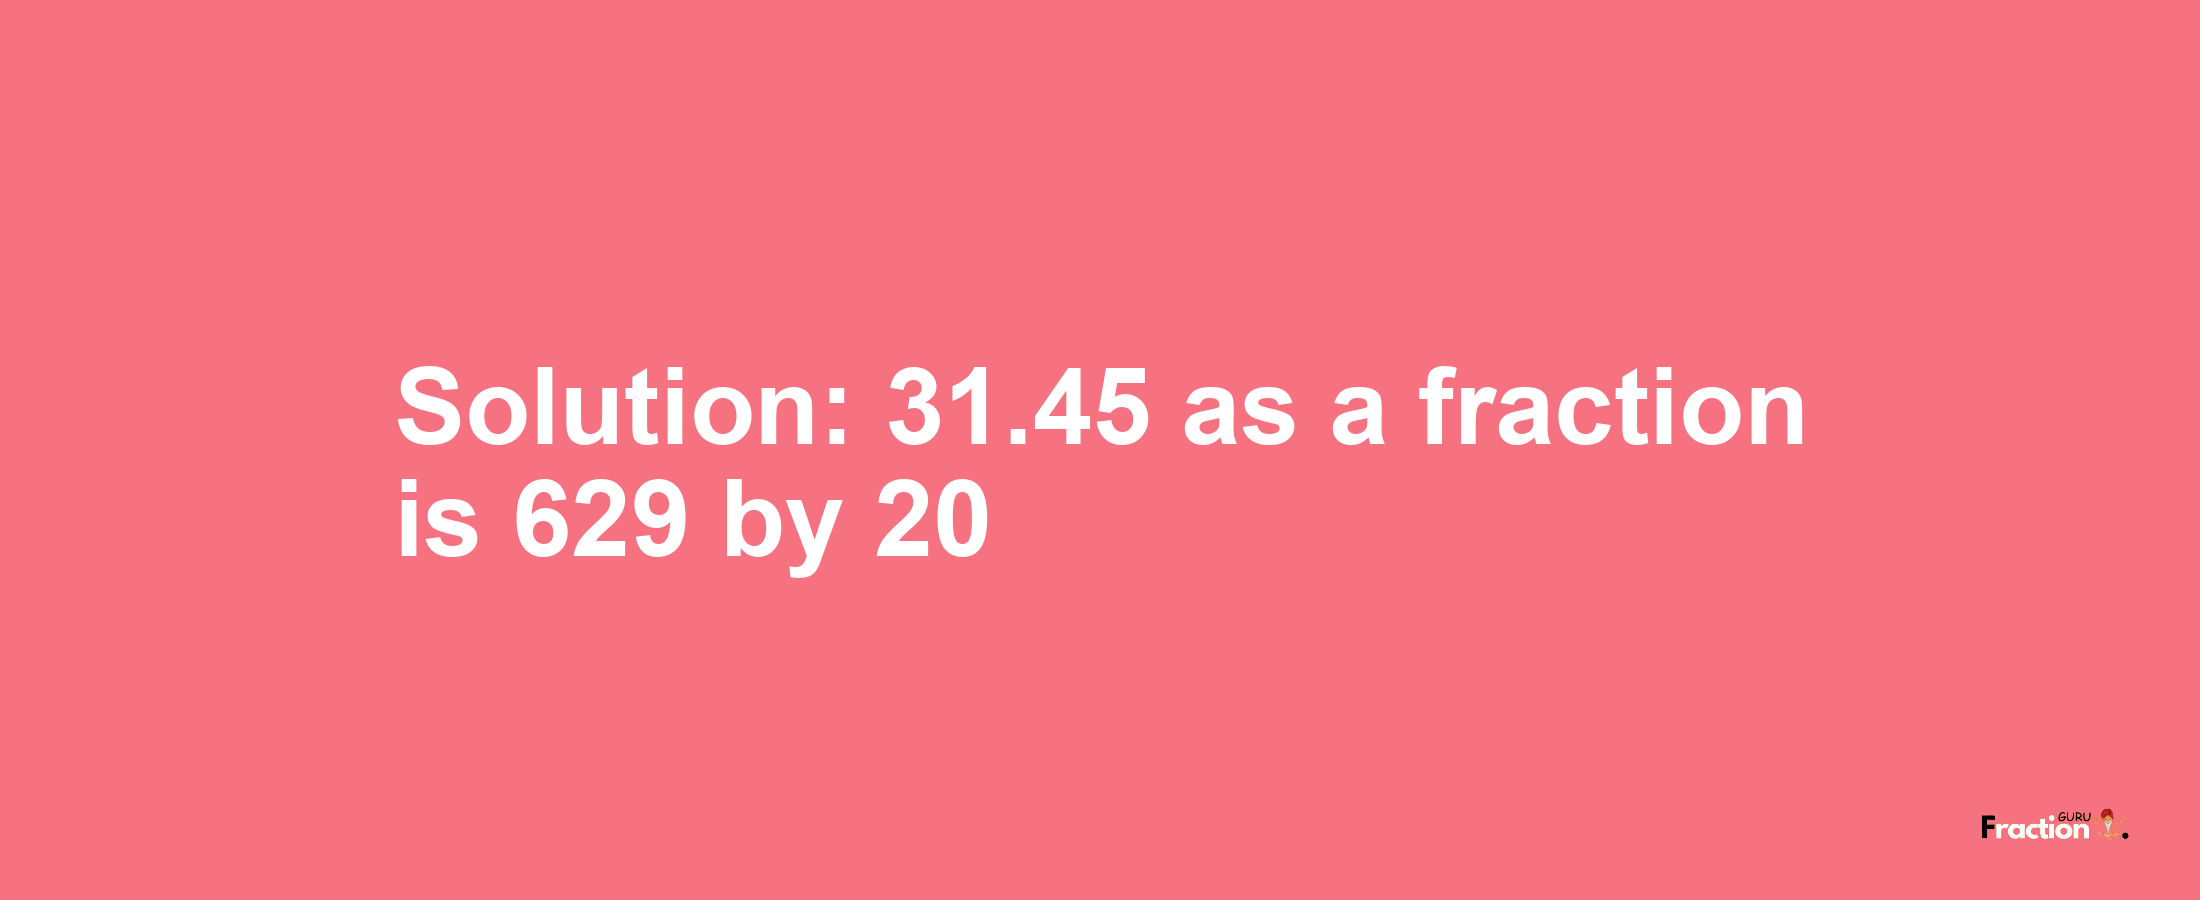 Solution:31.45 as a fraction is 629/20